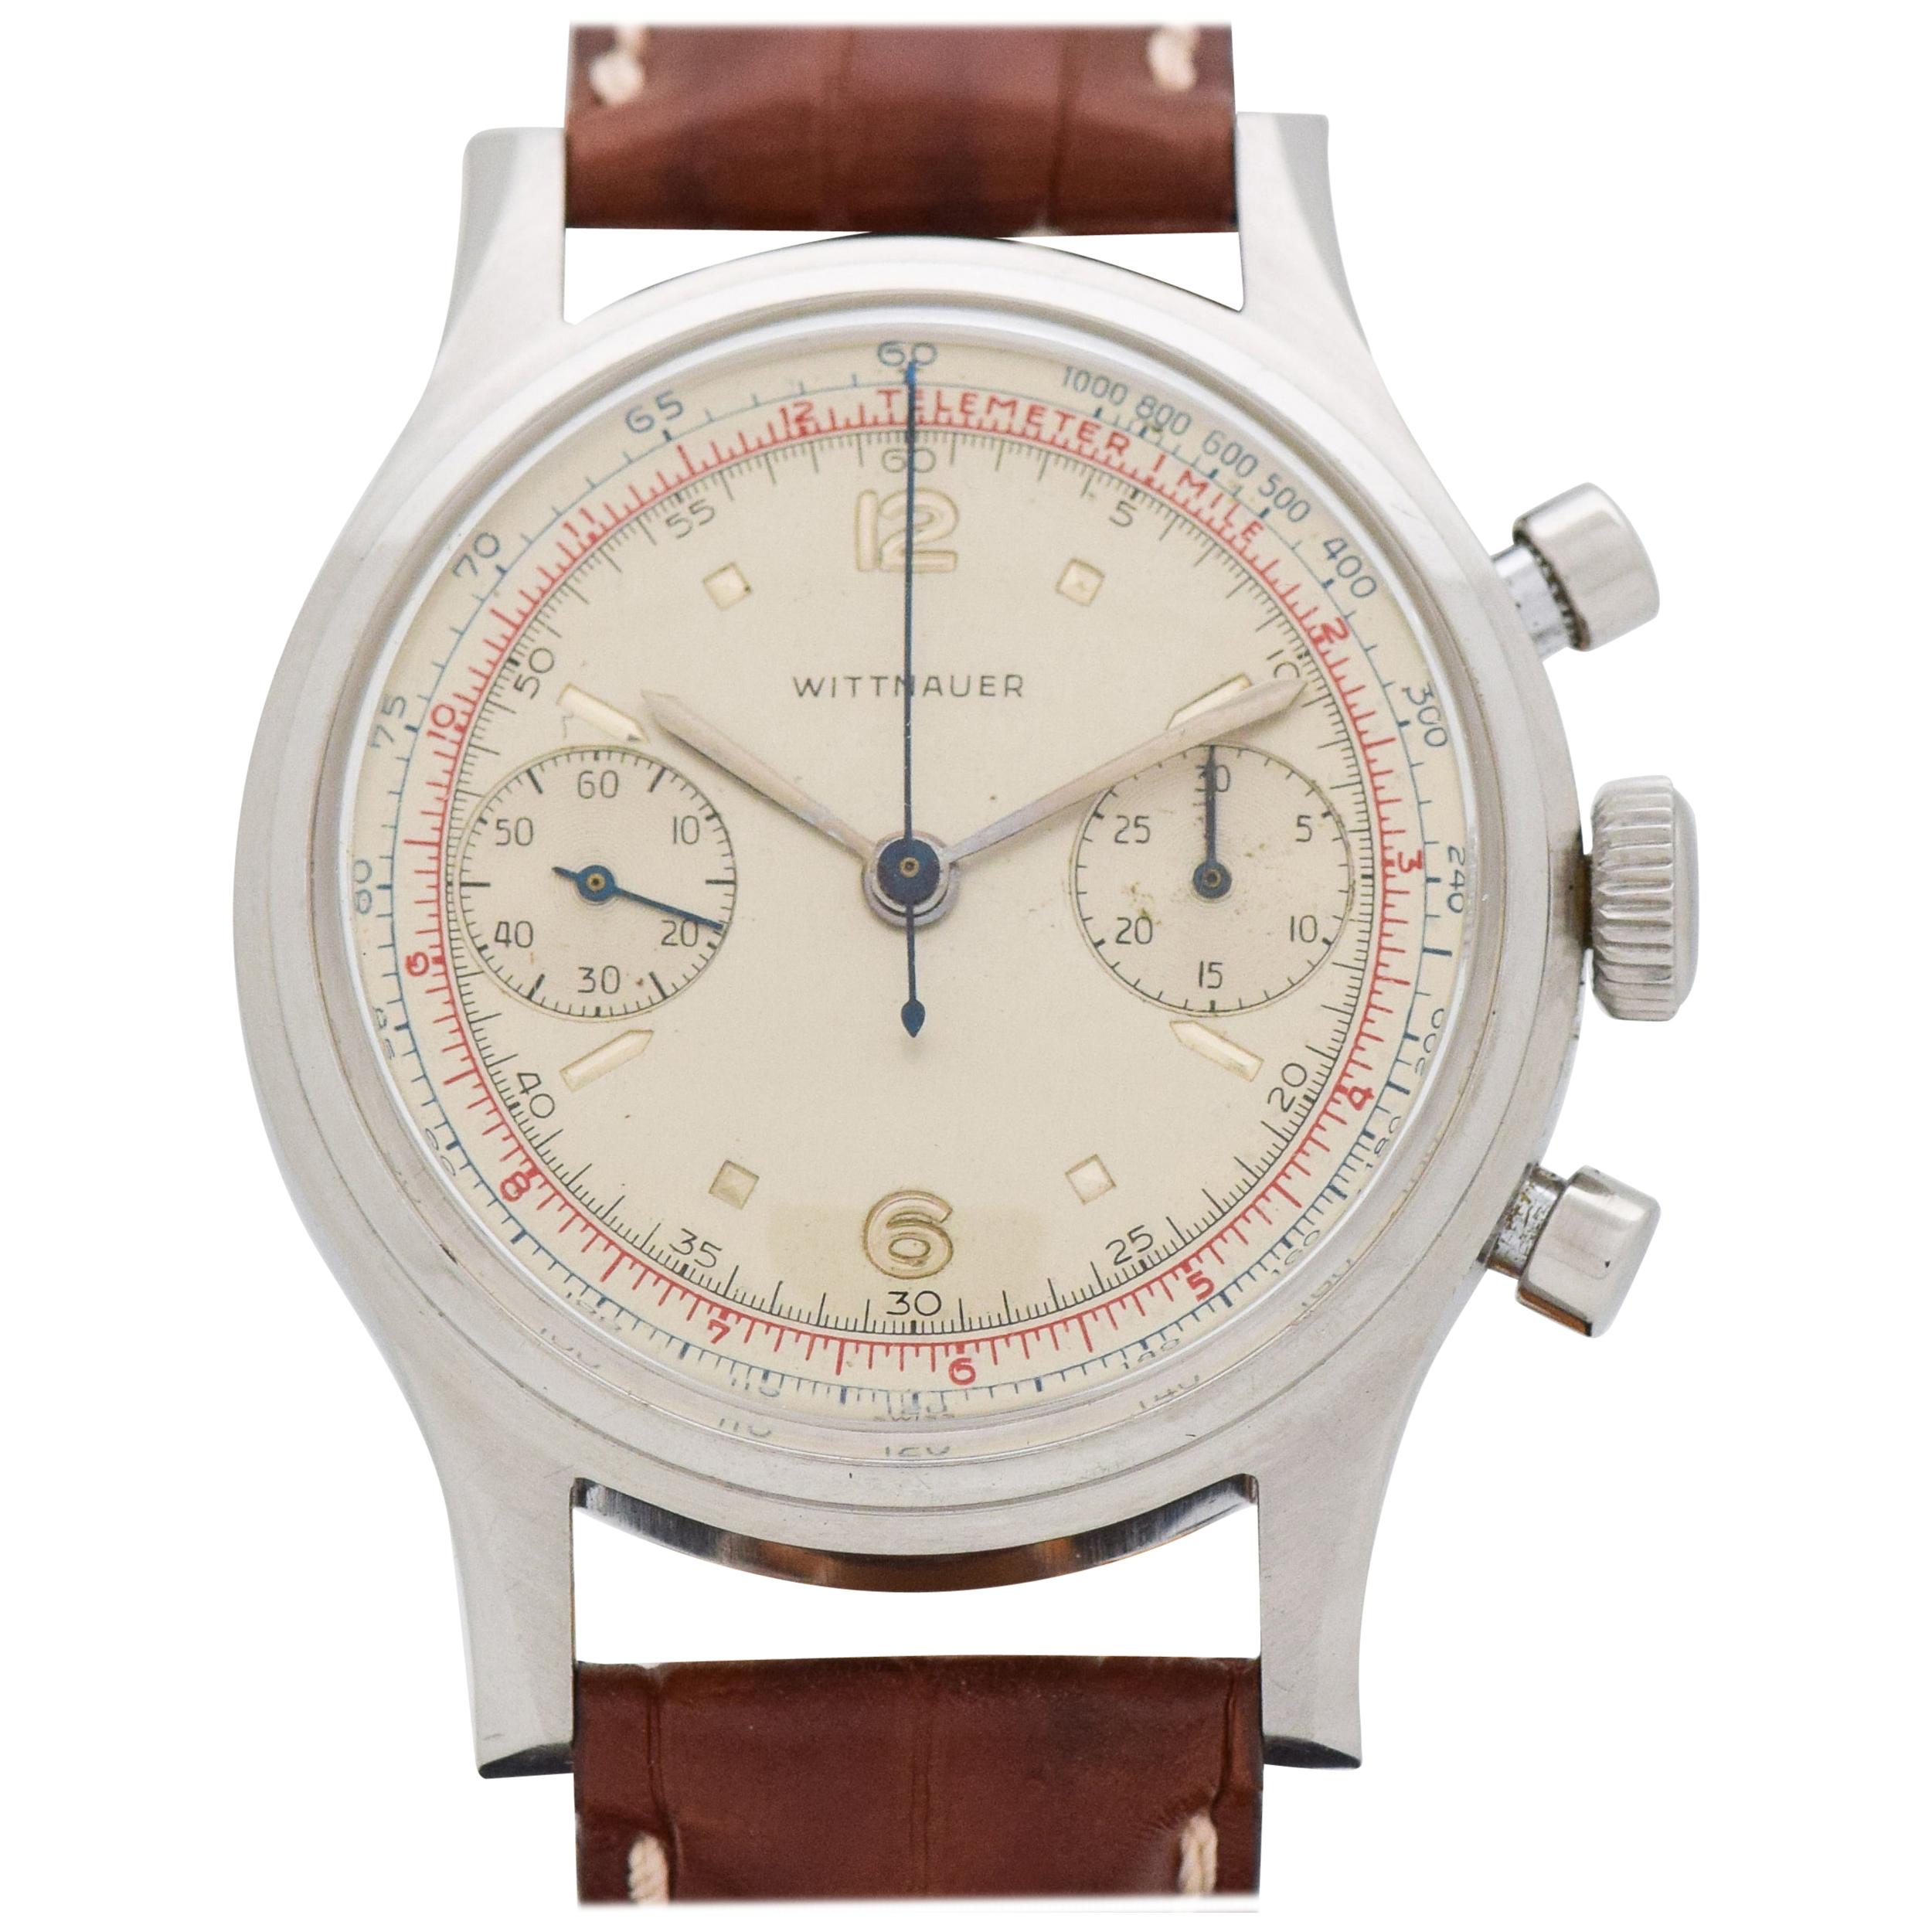 Vintage Wittnauer Chronograph 2-Register Stainless Steel Watch, 1960s For Sale